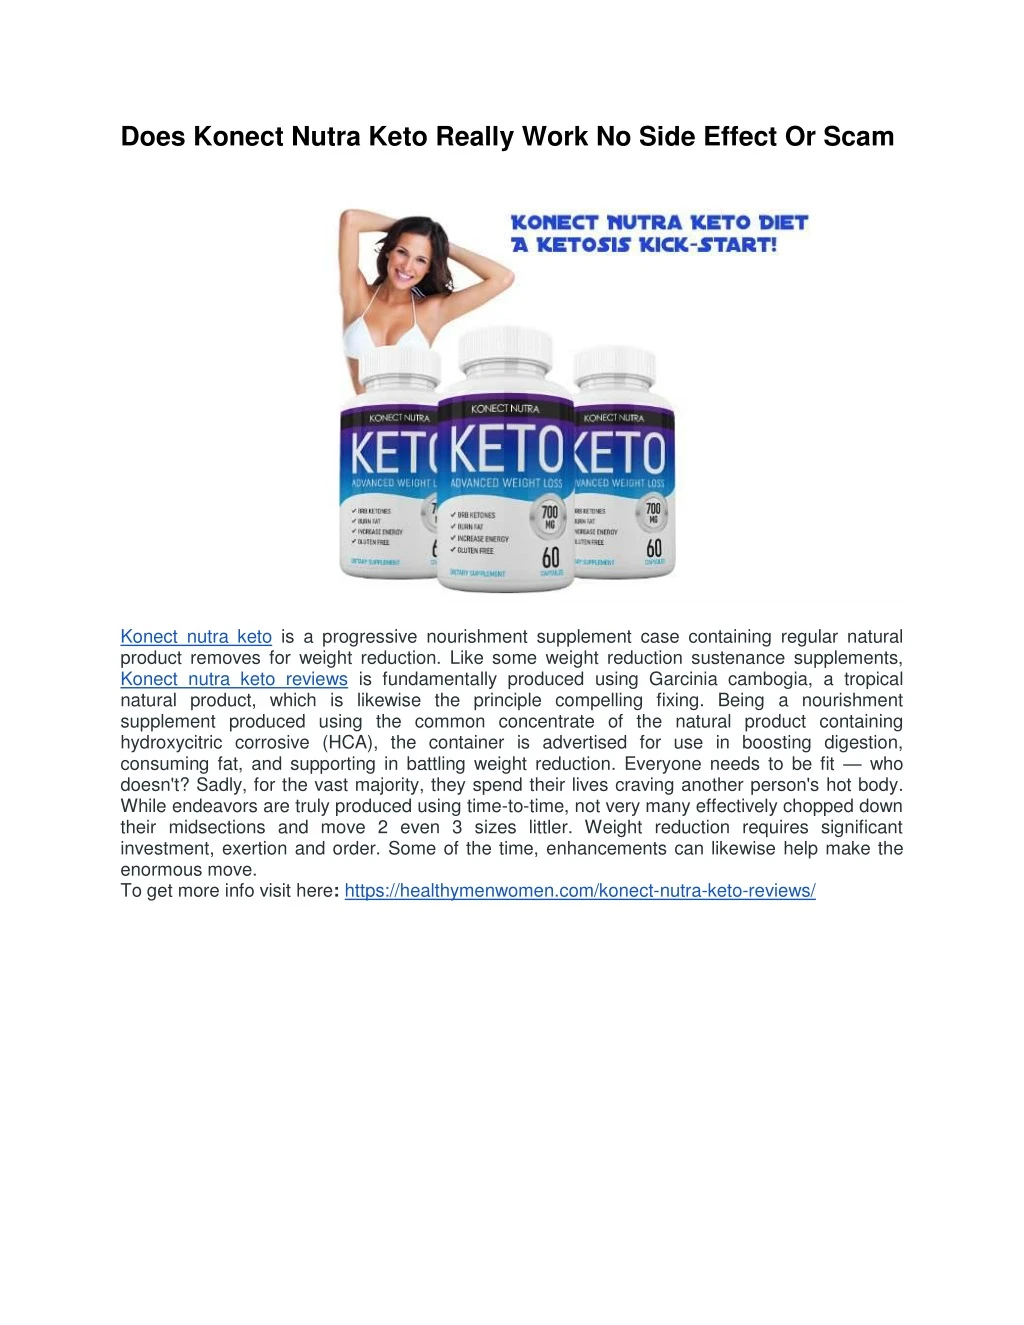 does konect nutra keto really work no side effect n.